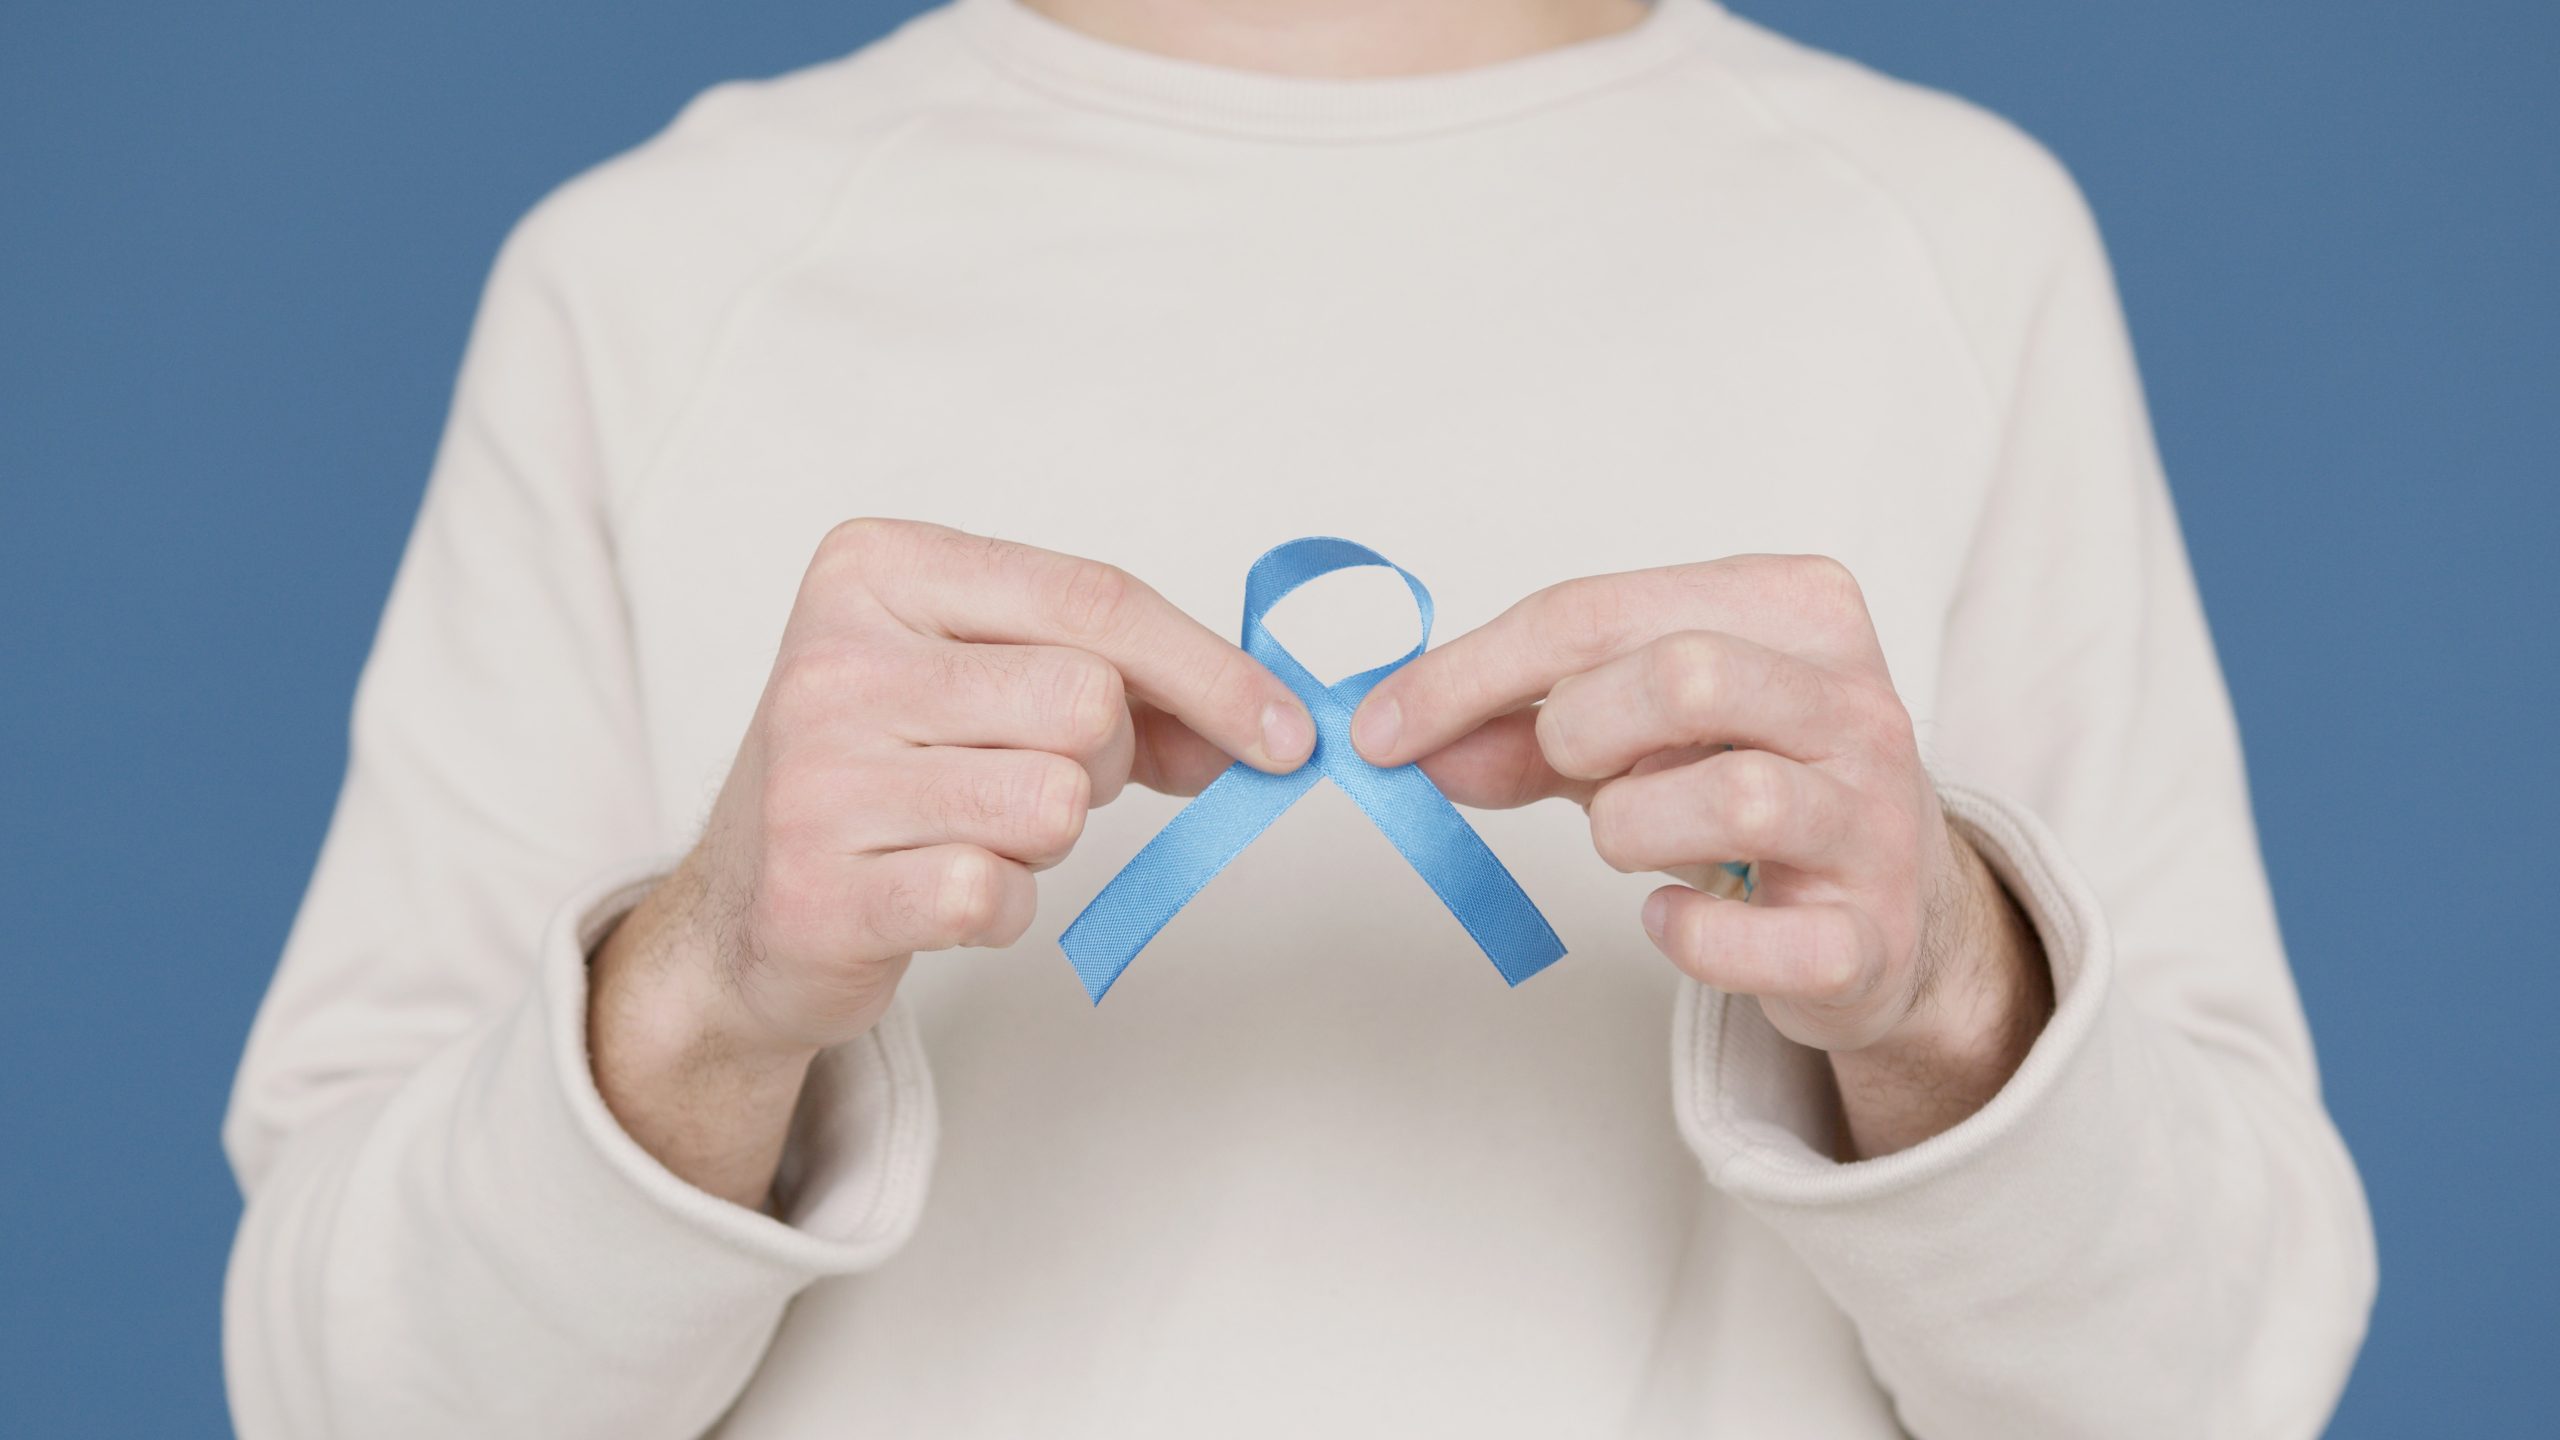 Hands holding a blue charity awareness ribbon.